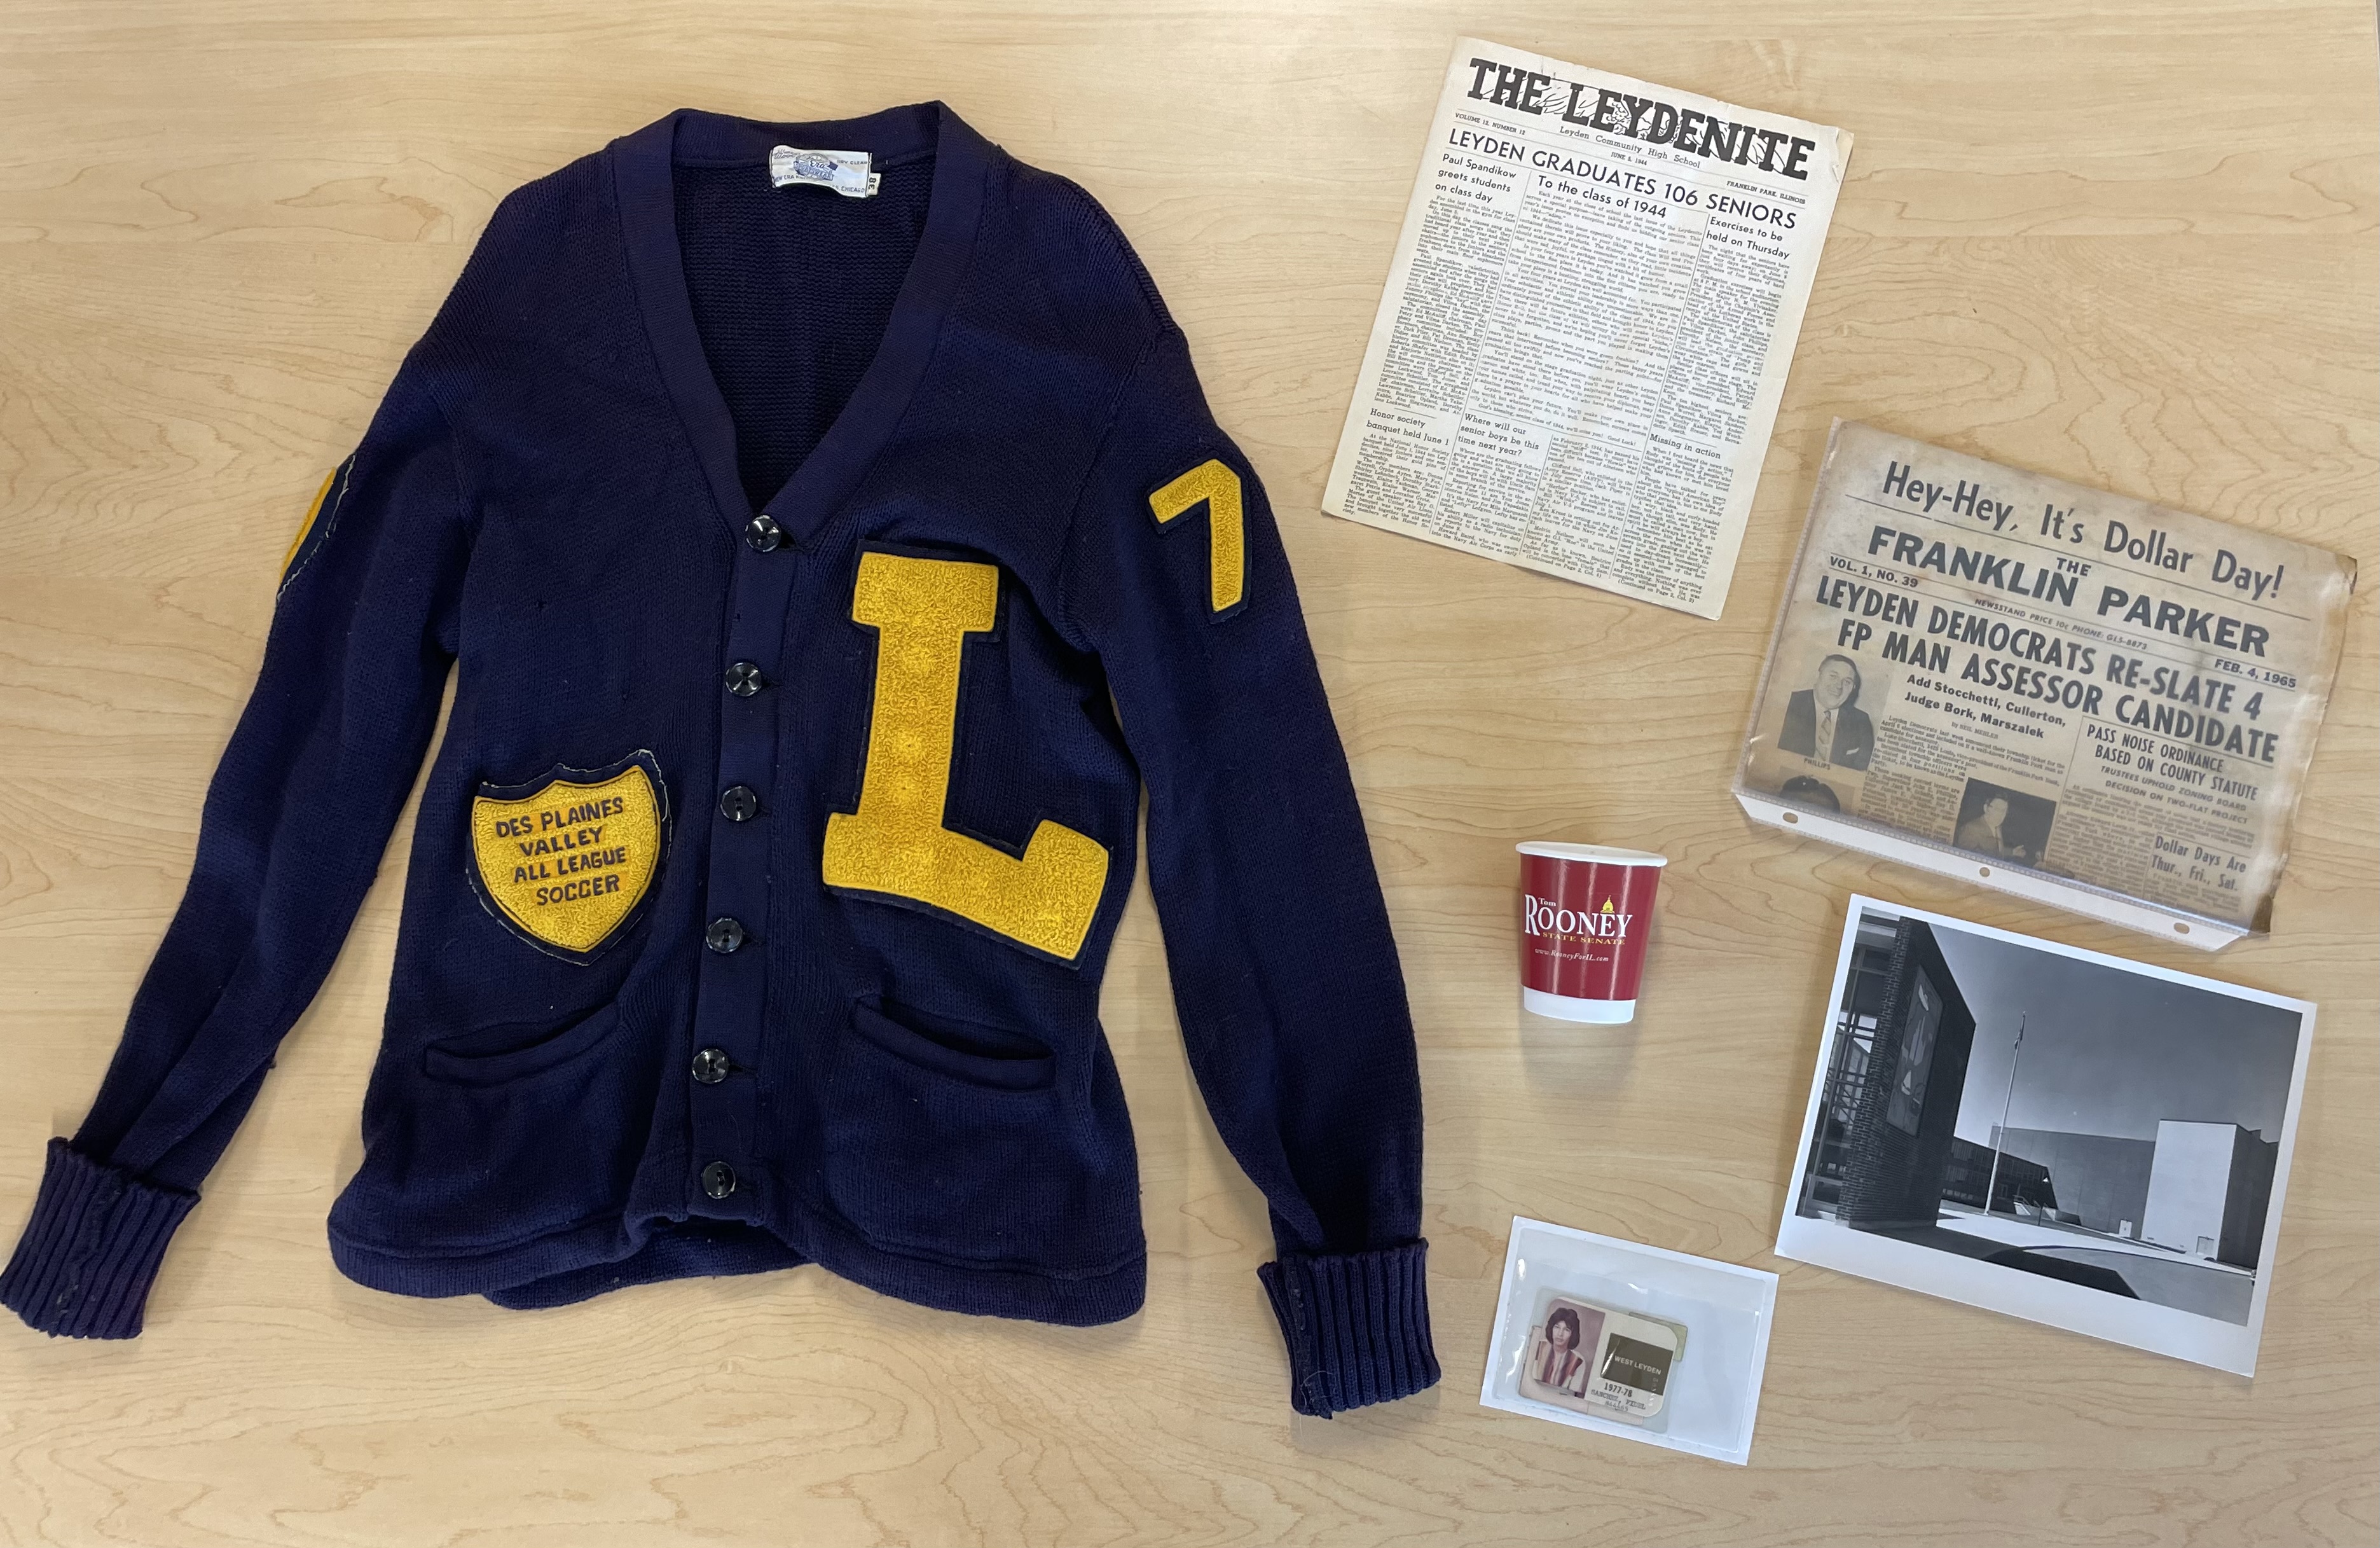 A letterman jersey laid out on a table next to two local newspapers from 1944 and 1965, a paper cup labeled 'Tim Rooney State Senate,' a photo of a building, and a student ID.